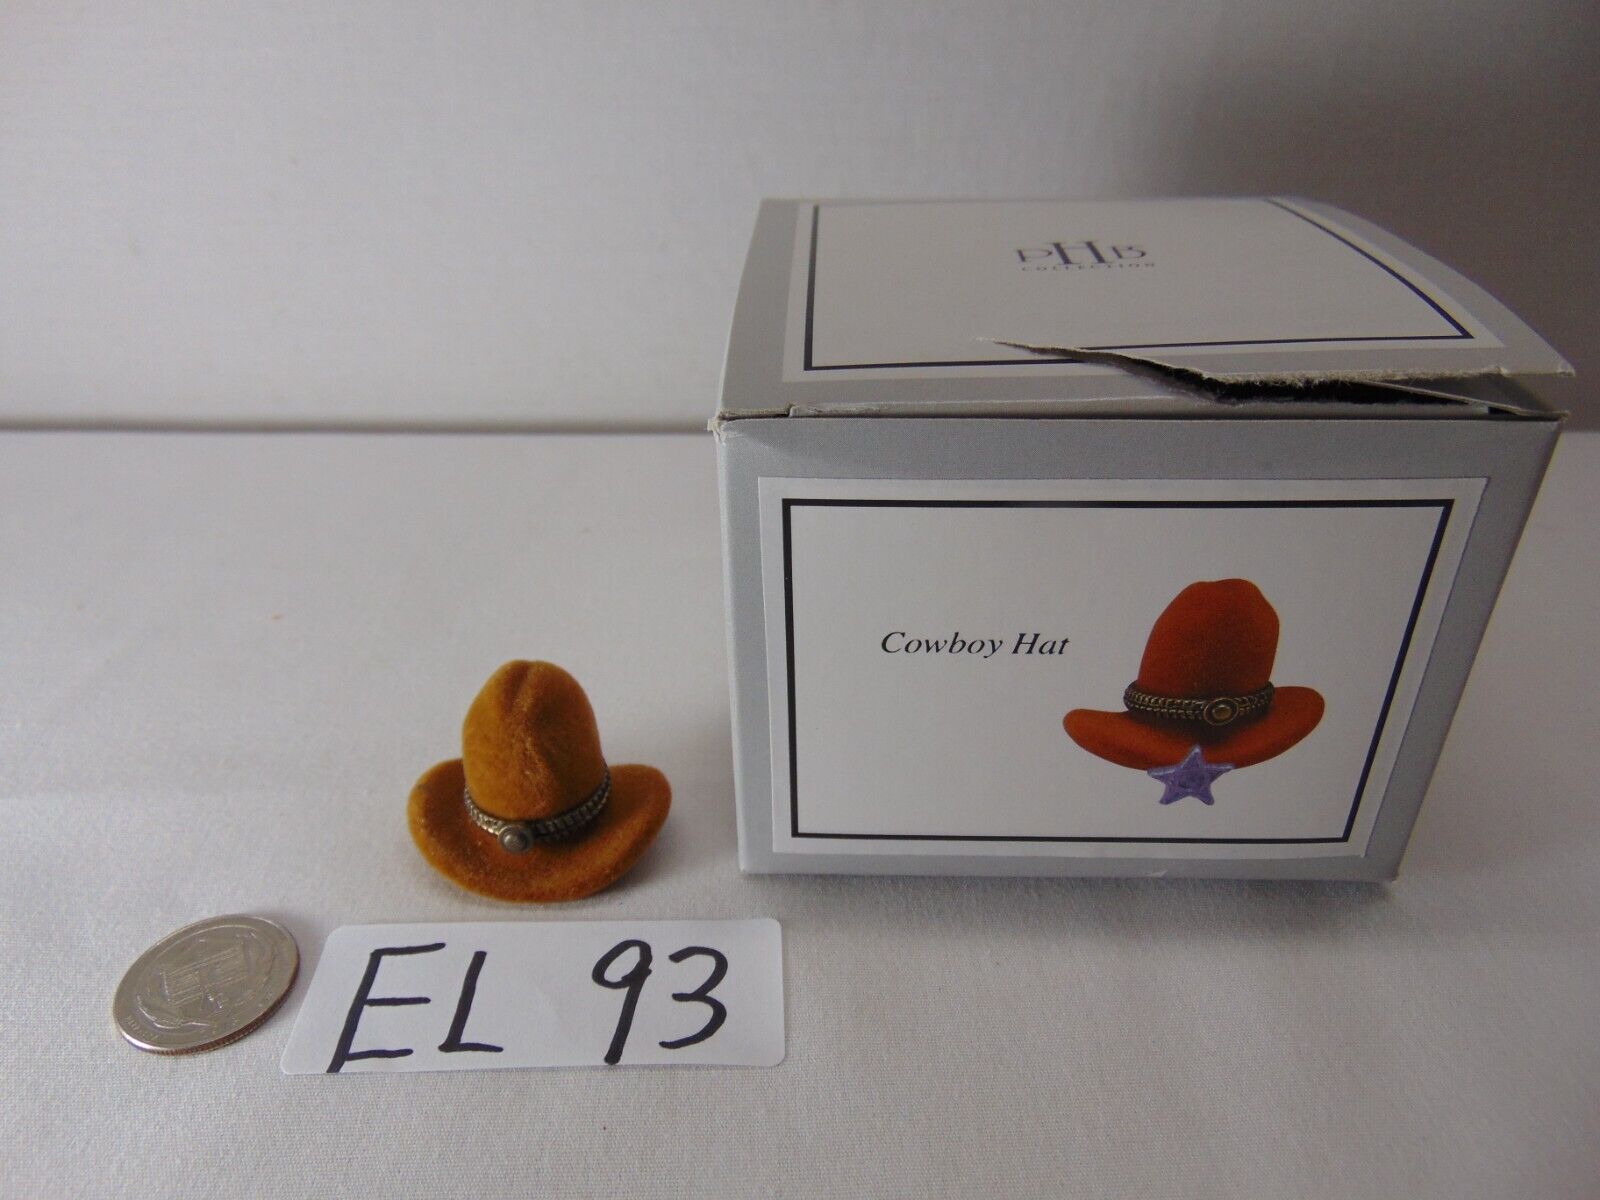 Porcelain Hinged Box Trinket Midwest PHB  New Mini Cowboy Hat with Star